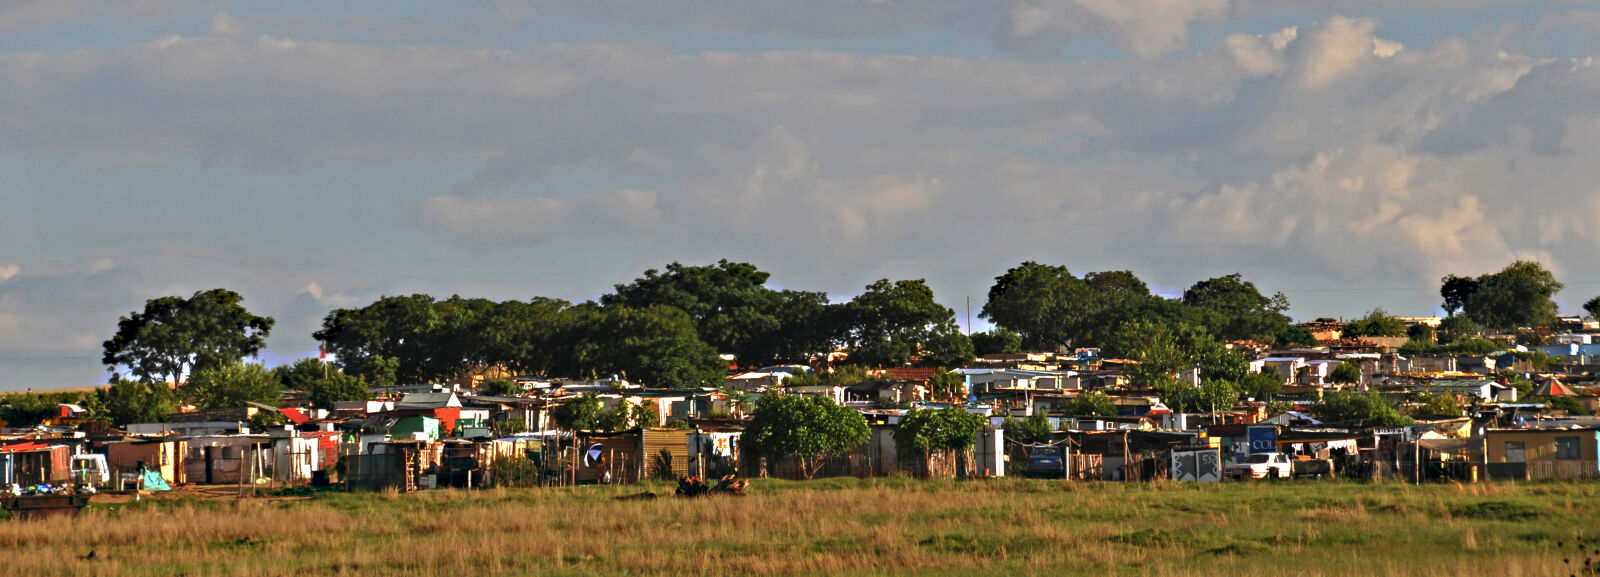 Nikon D300 sample photo. Houses, south, africa, sqatters photography